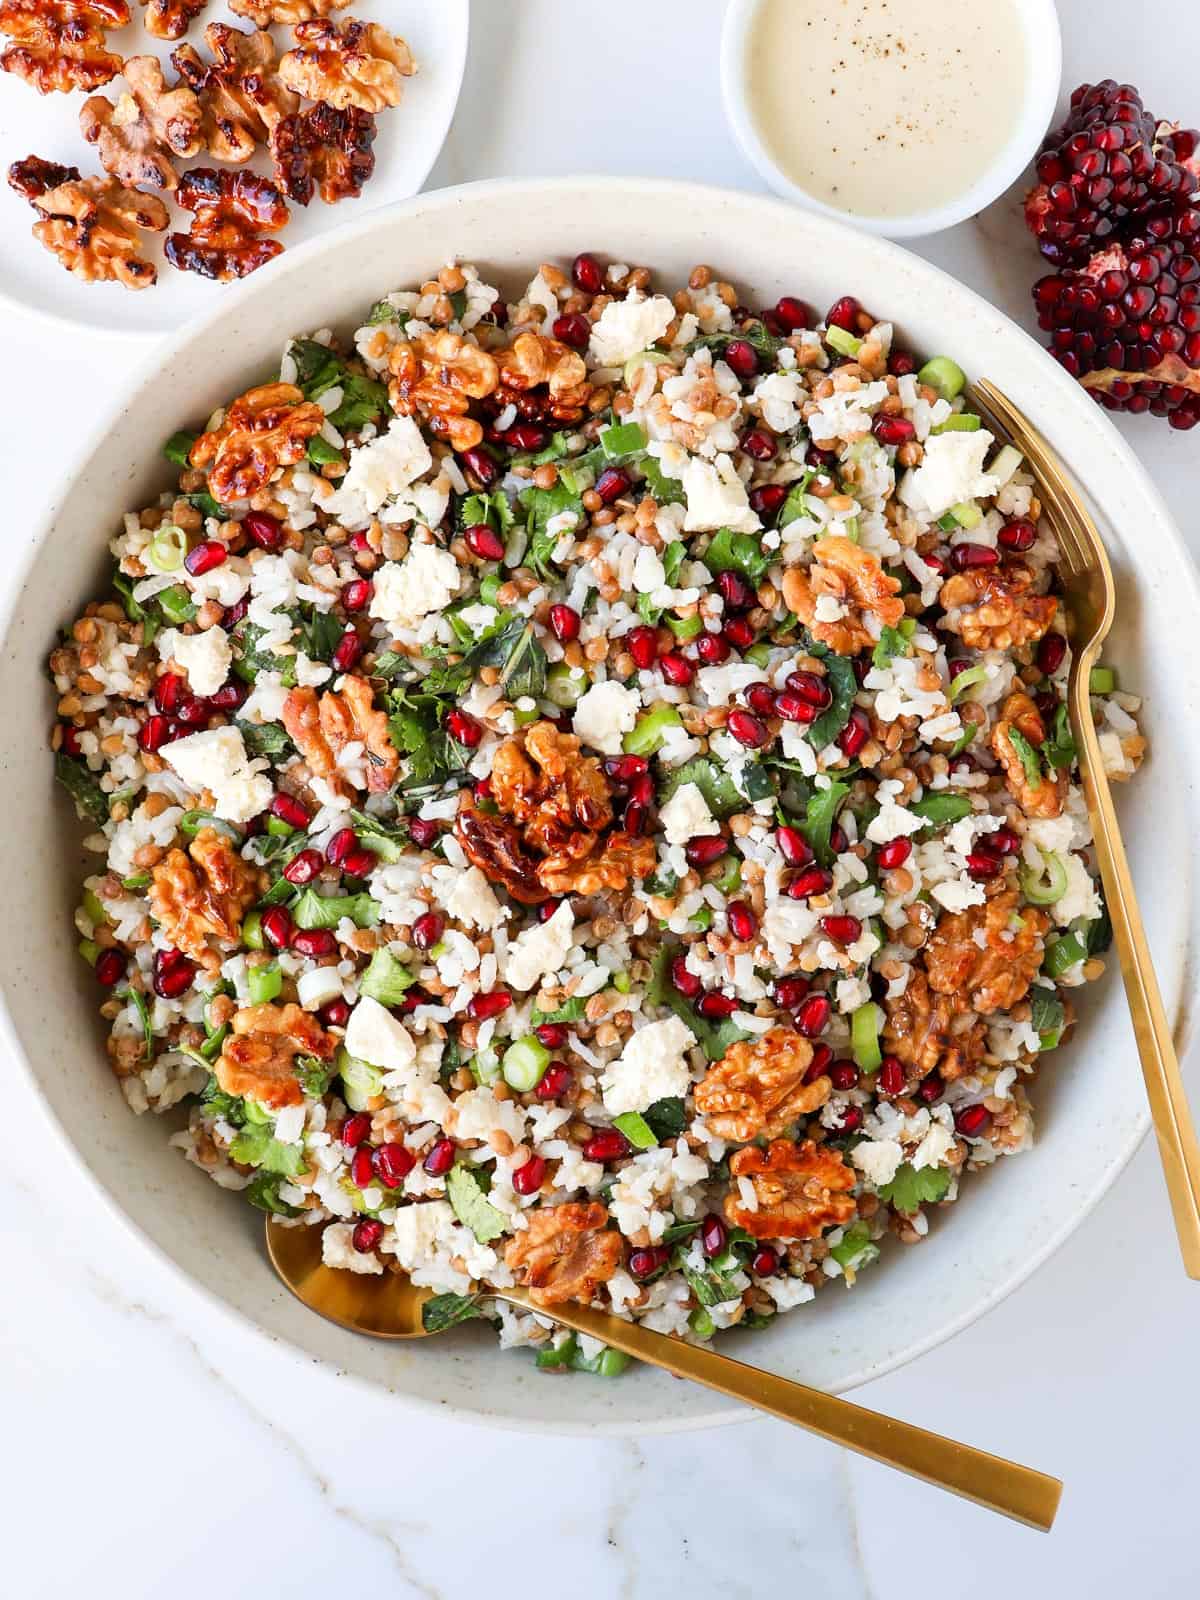 Pomegranate and walnut salad in a bowl with serving spoons.